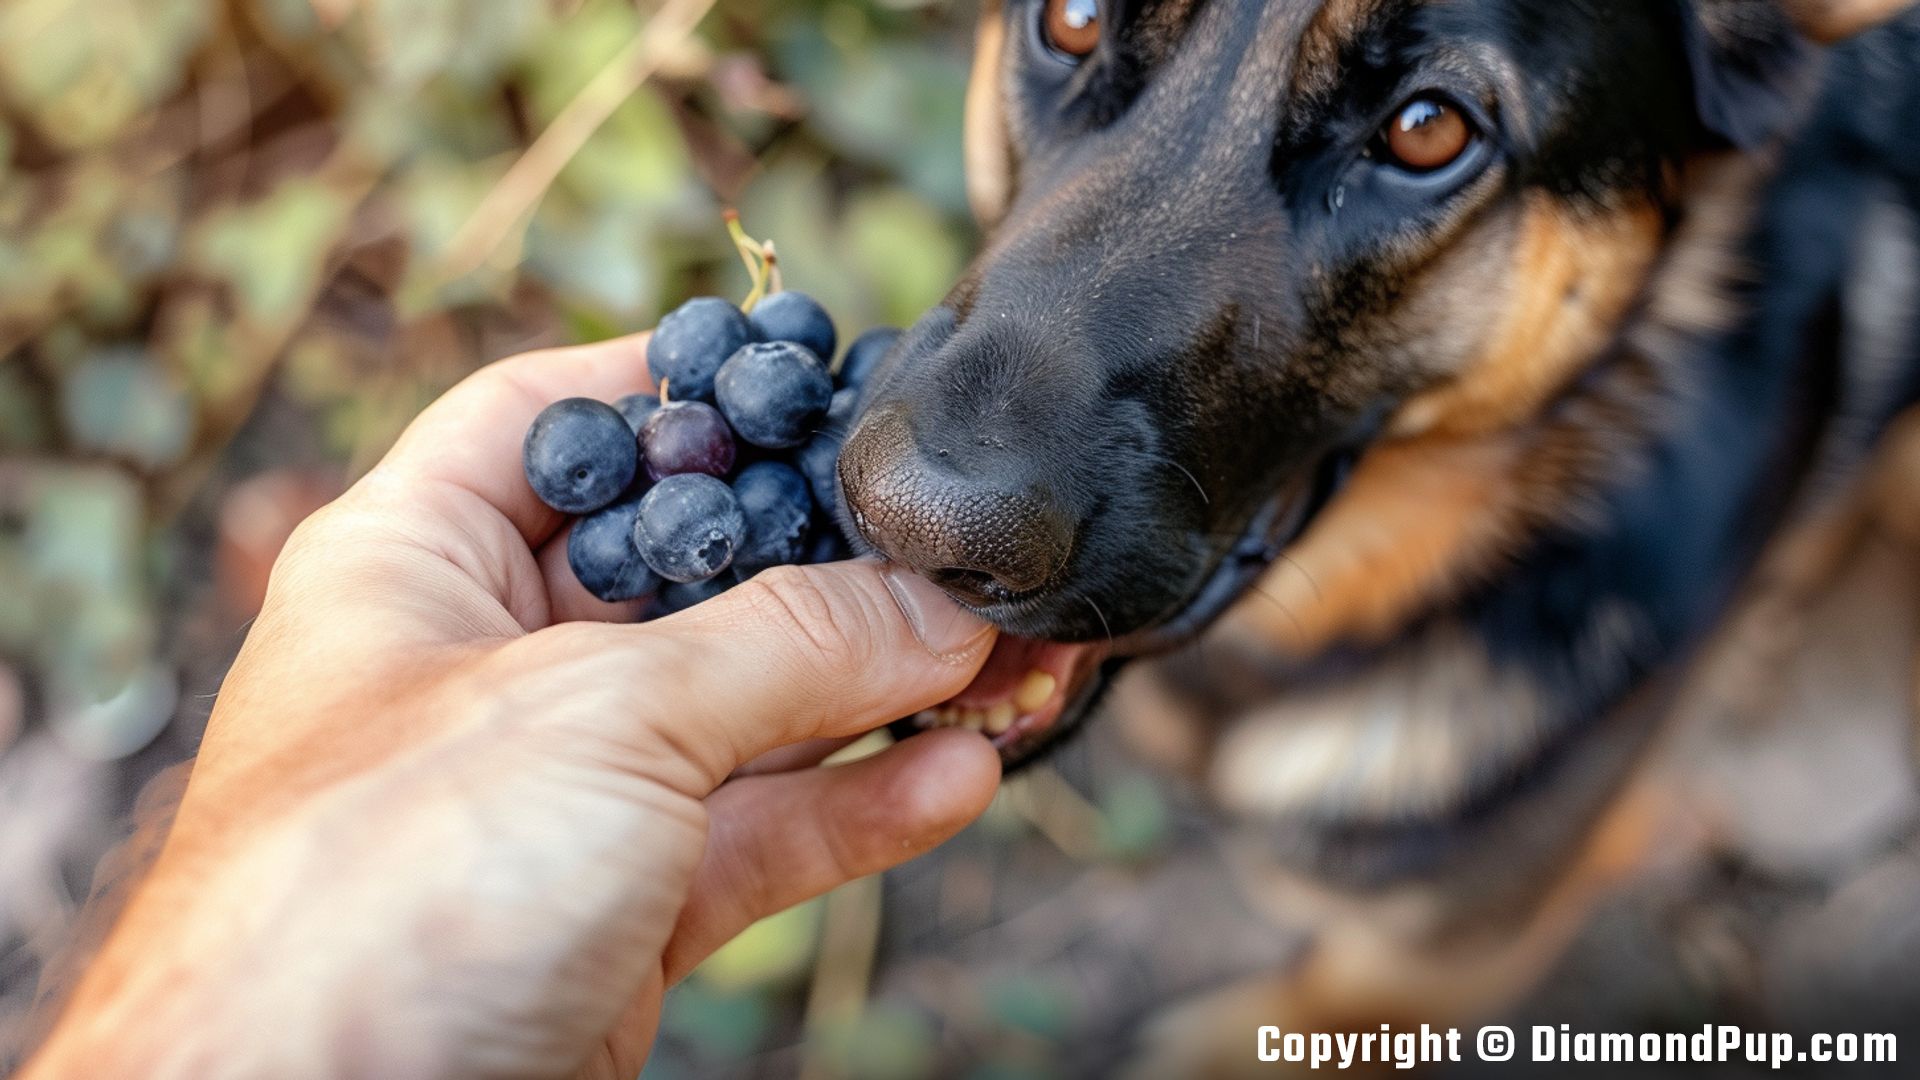 Photograph of a Playful German Shepherd Snacking on Blueberries